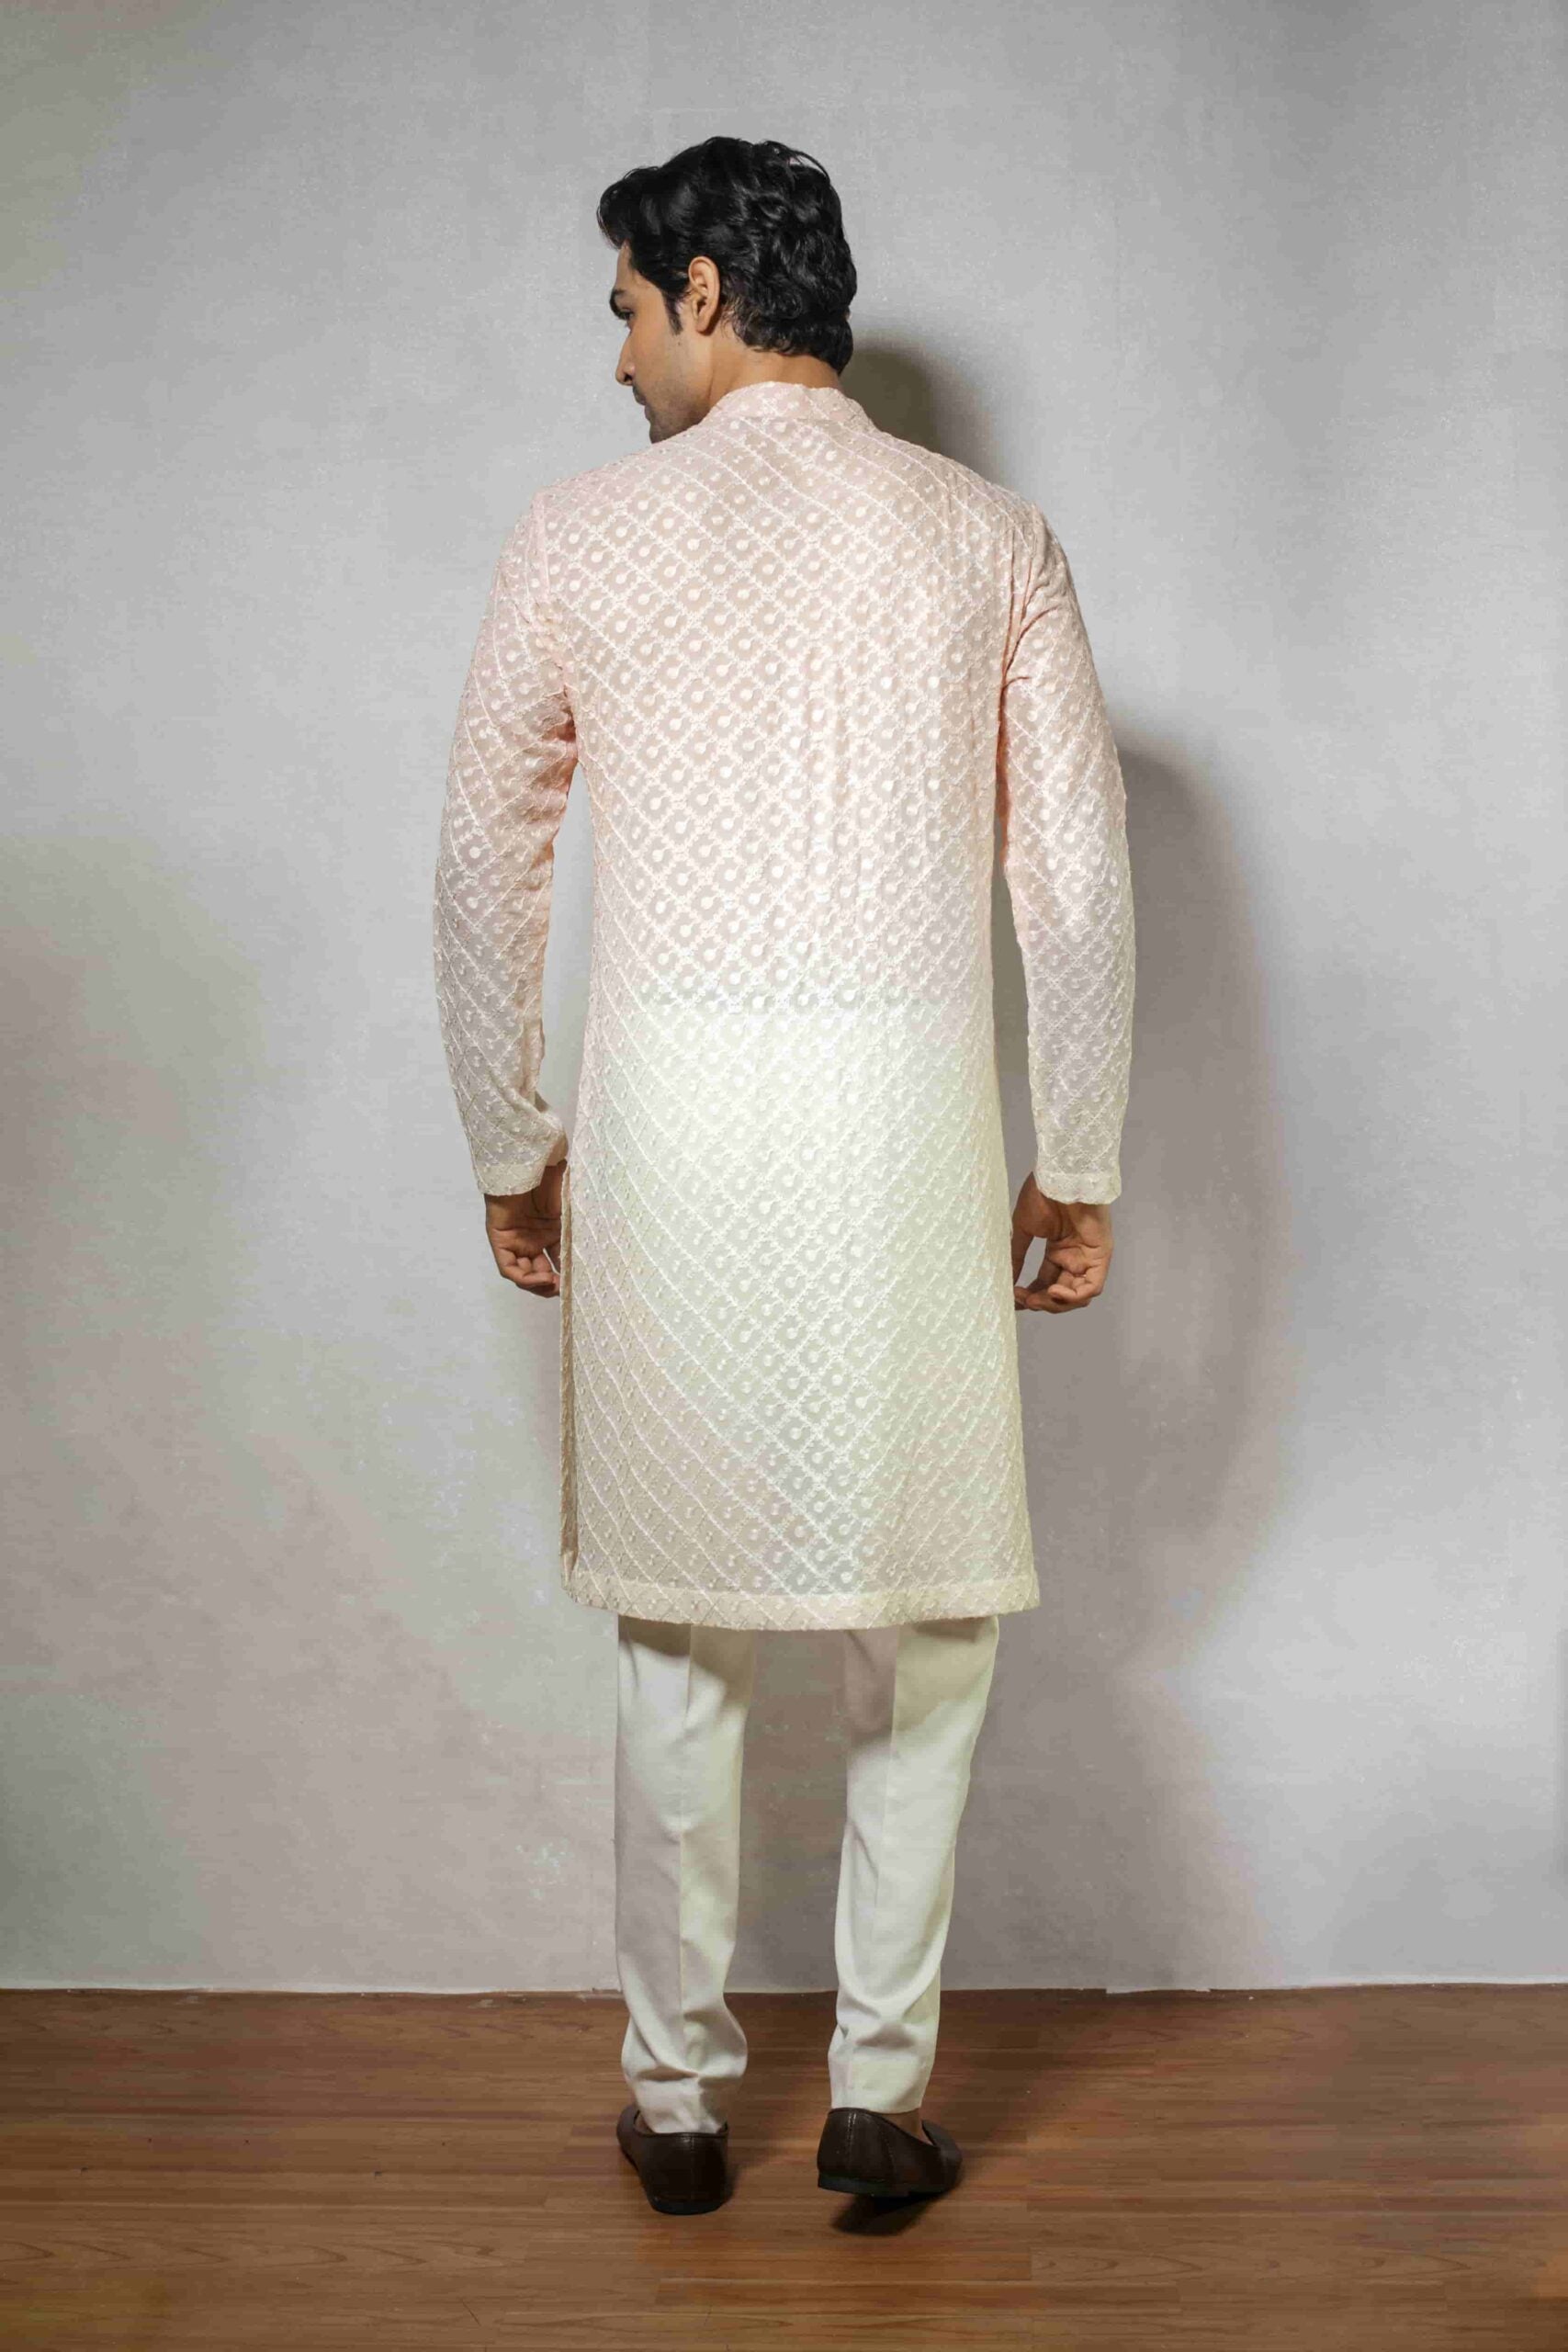 Stylish Men's Embroidered Outfit